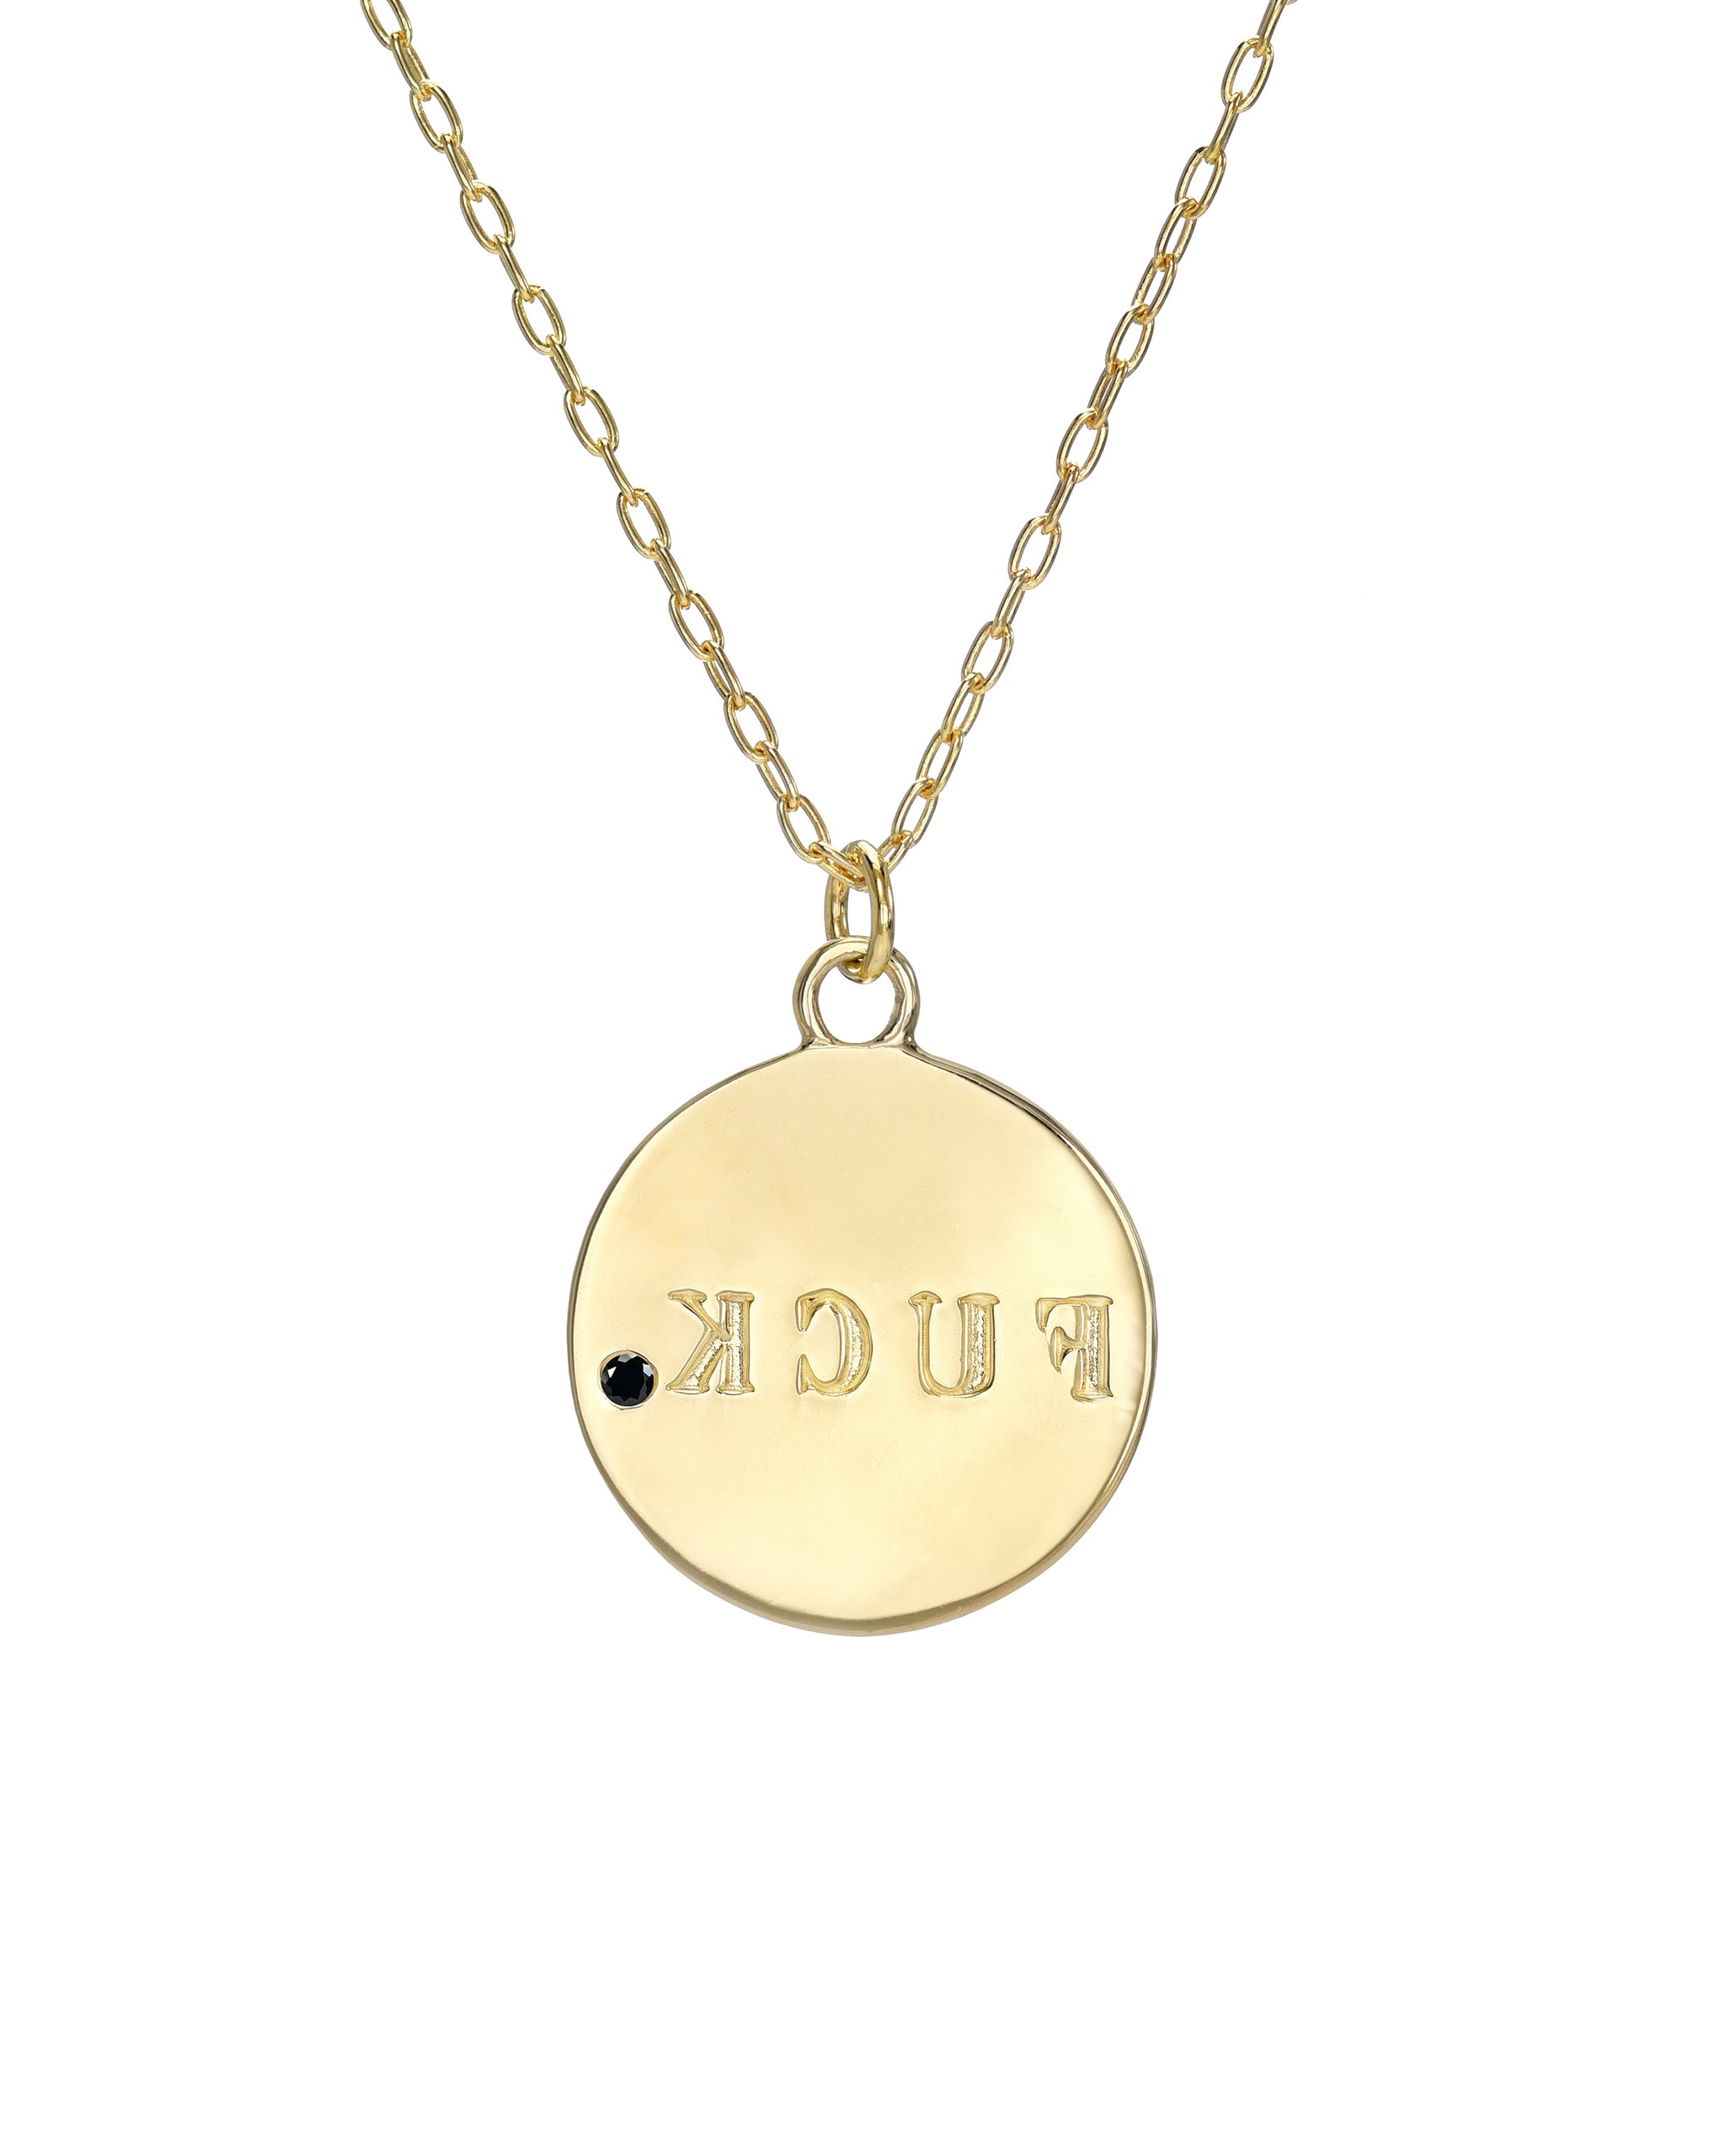 Retrograde Necklace, 14k Gold Vermeil Necklace with F*CK spelled inversely and a 2mm  semi-precious stone, 16"-18" adjustable chain, handmade in Los Angeles, California by Turquoise and Tobacco